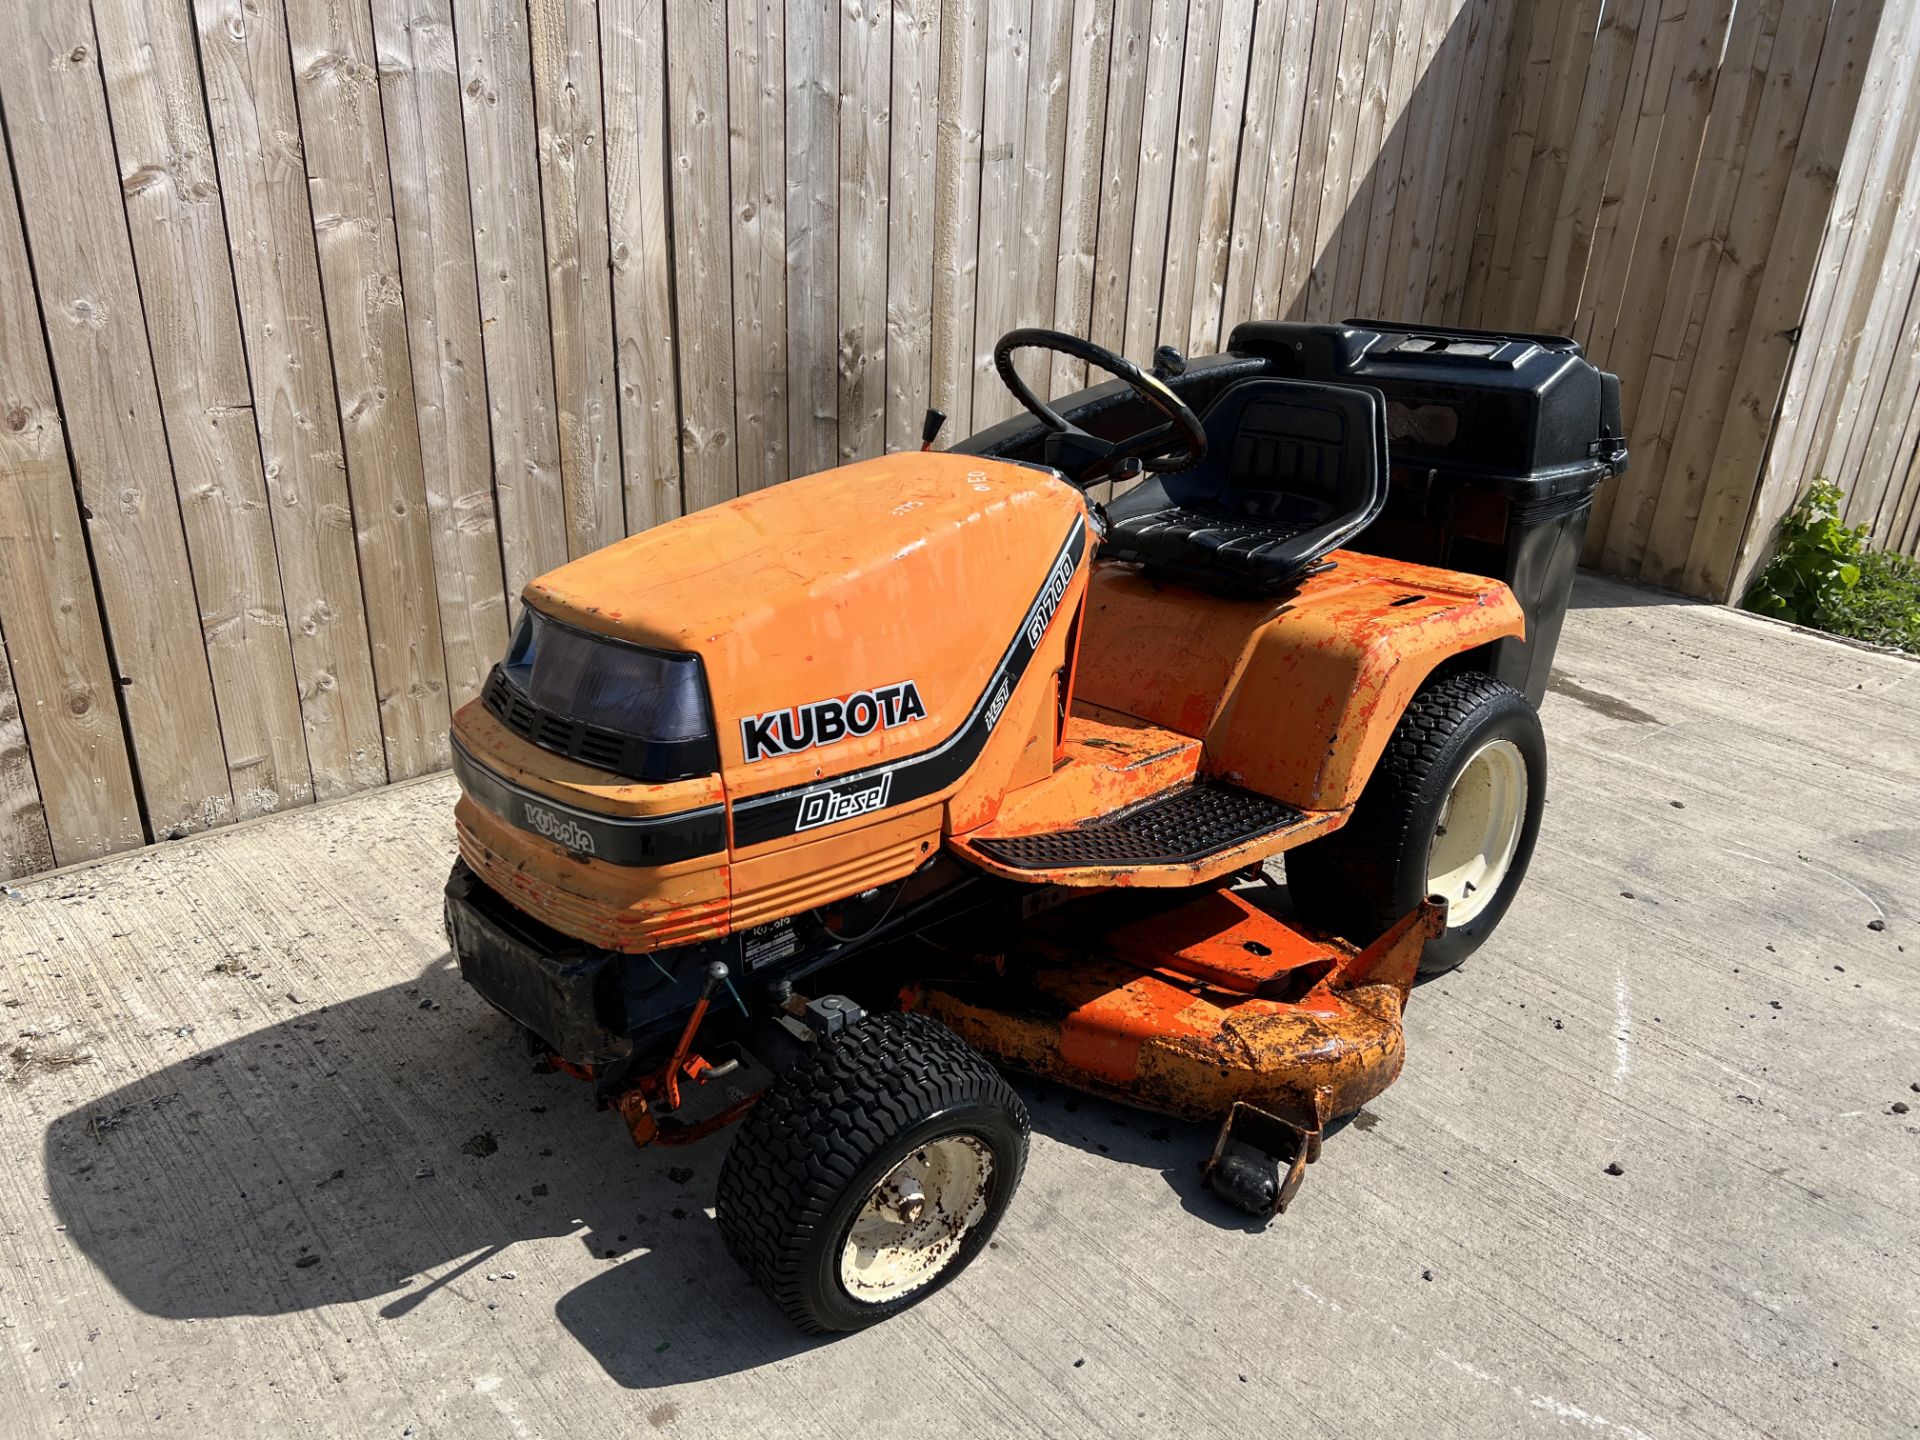 KUBOTA DIESEL RIDE ON MOWER STARTS RUNS AND DRIVES LOCATED IN NORTH YORKSHIRE.